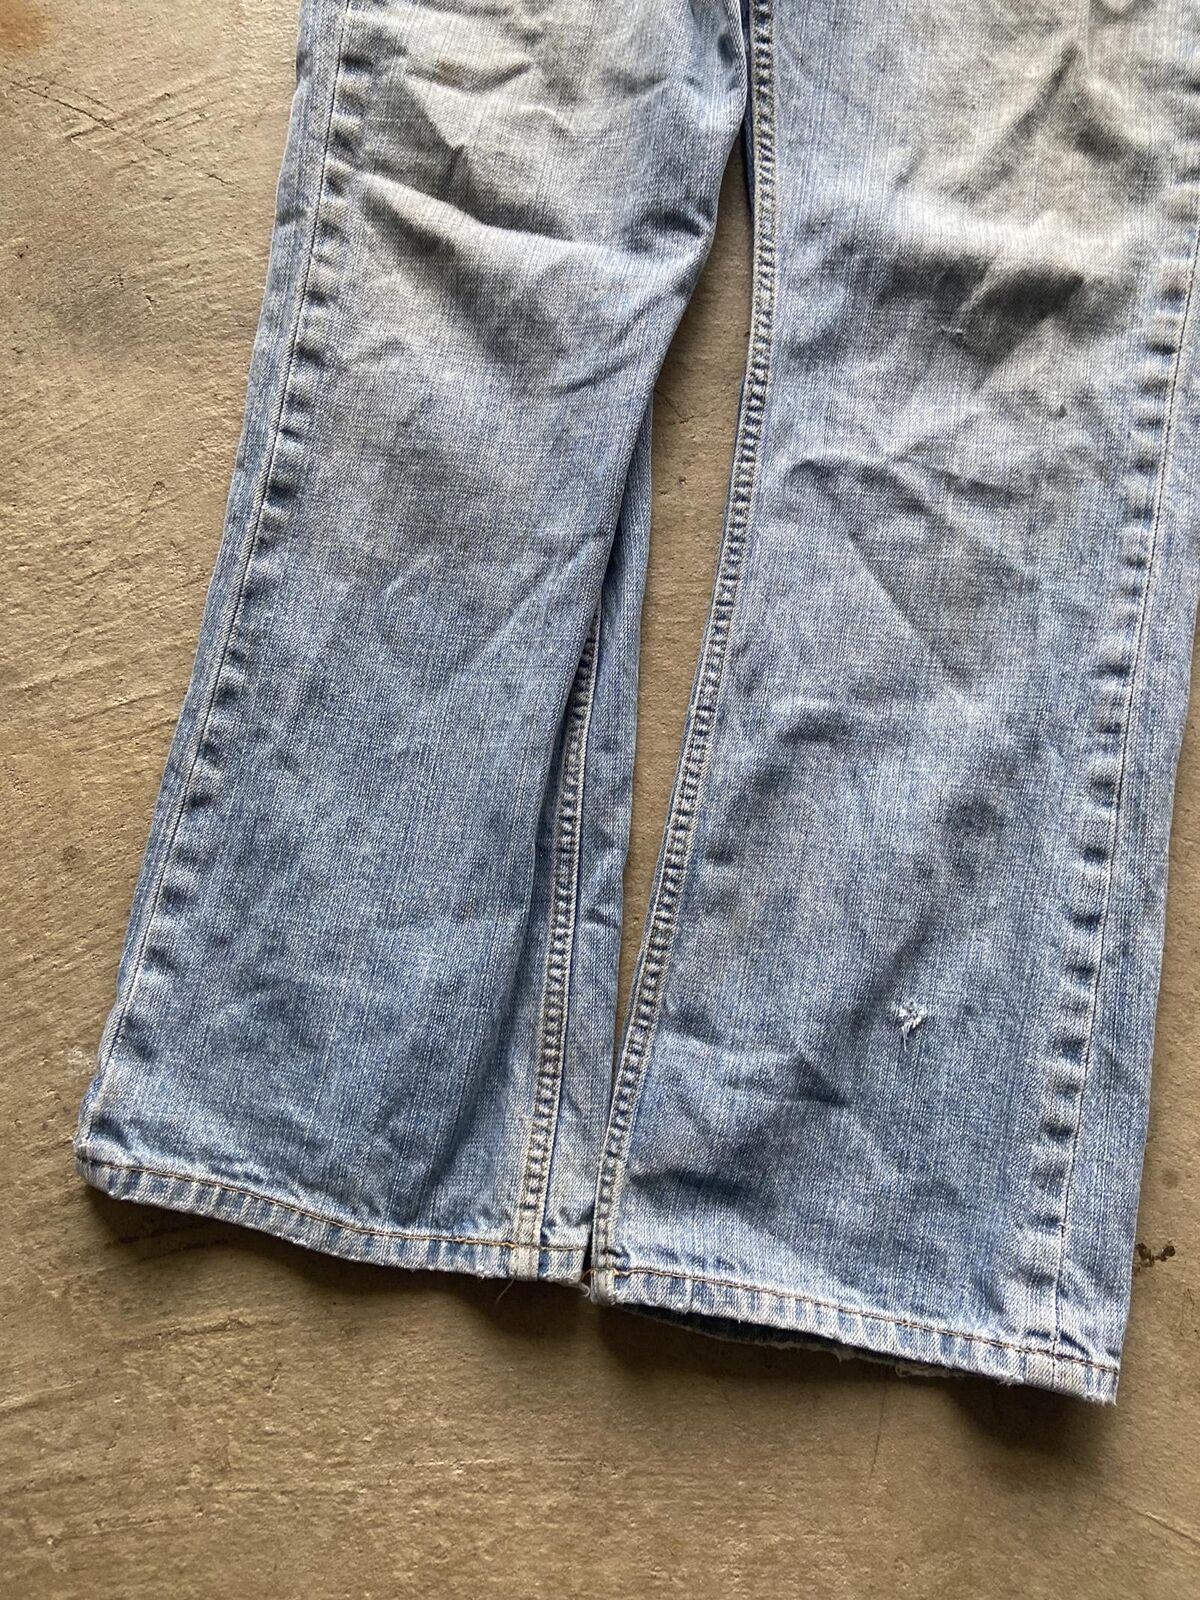 Vintage Levi's 527s Faded Jeans - image 2